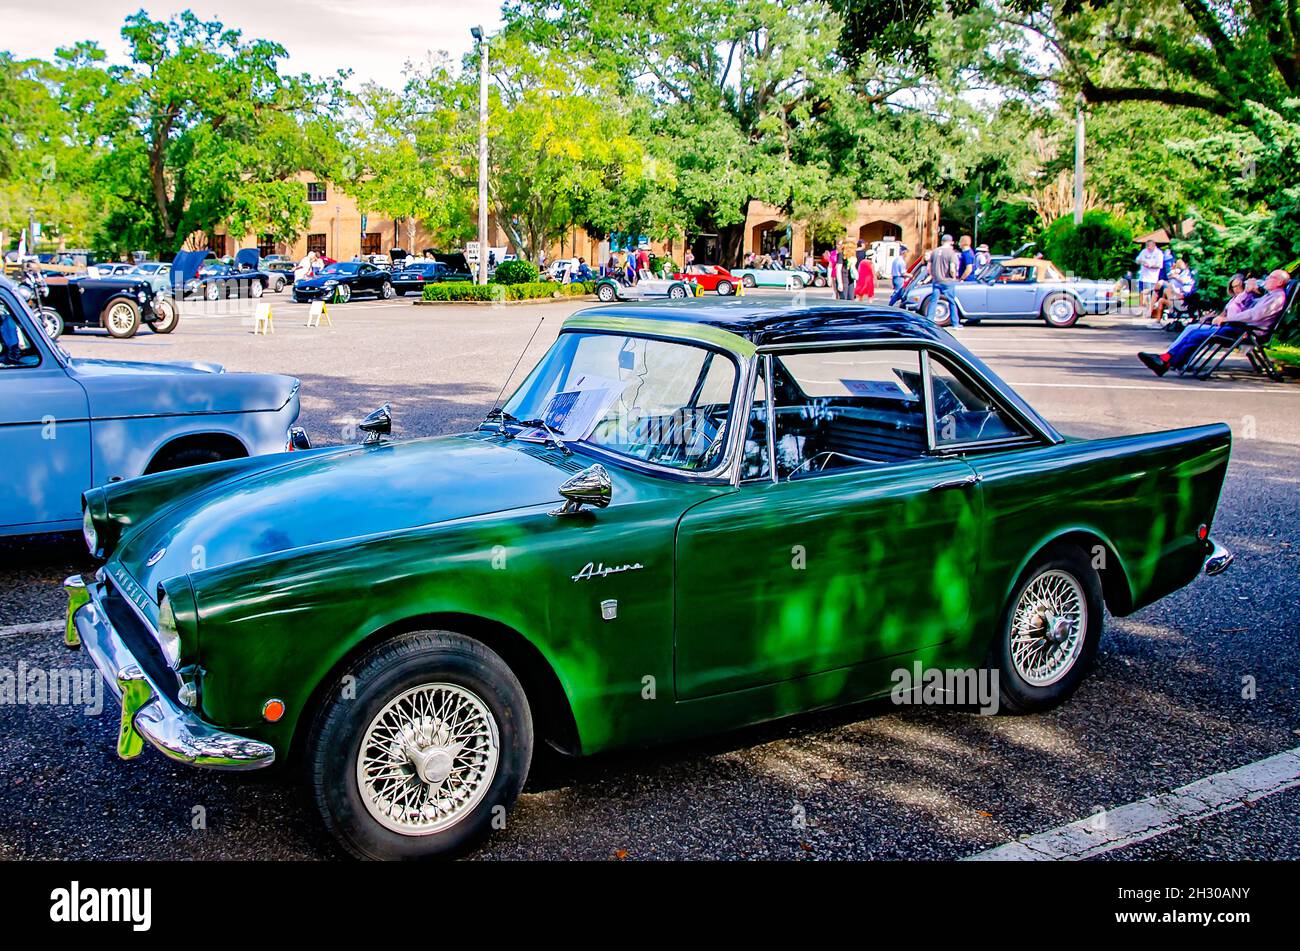 A 1963 Sunbeam Alpine is displayed at the 31st annual British Car Festival, Oct. 24, 2021, in Fairhope, Alabama. Stock Photo